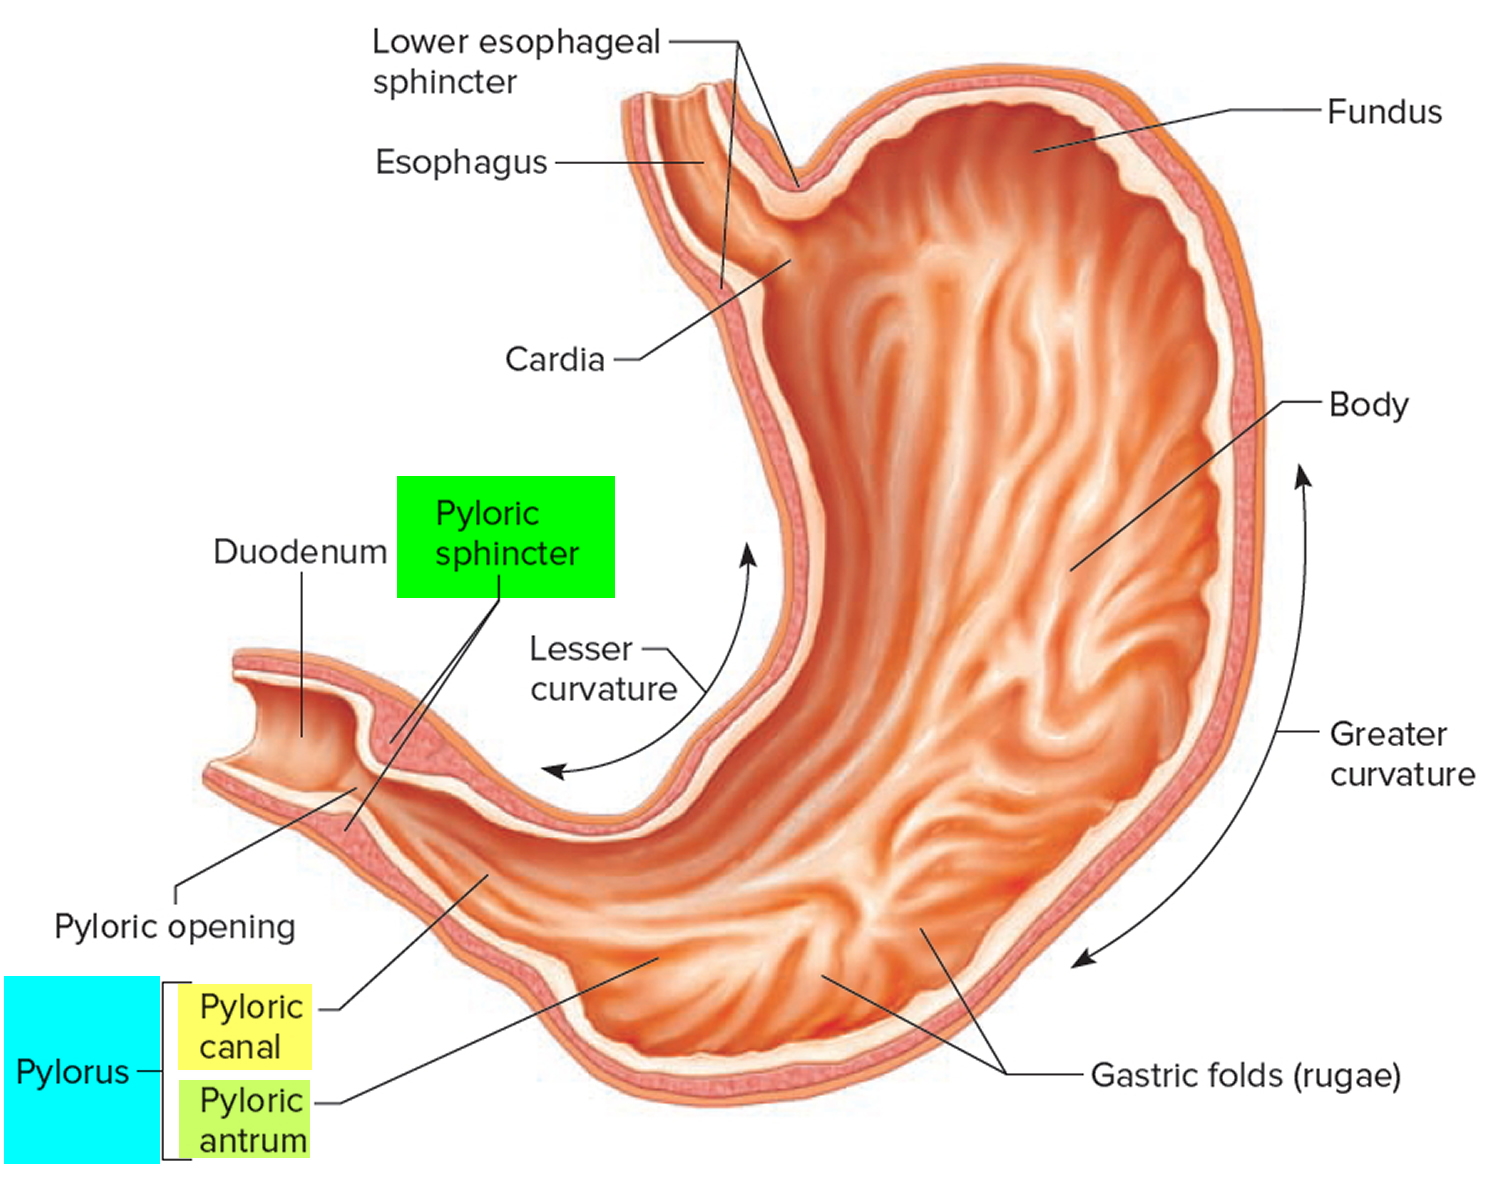 Pylorus of the stomach